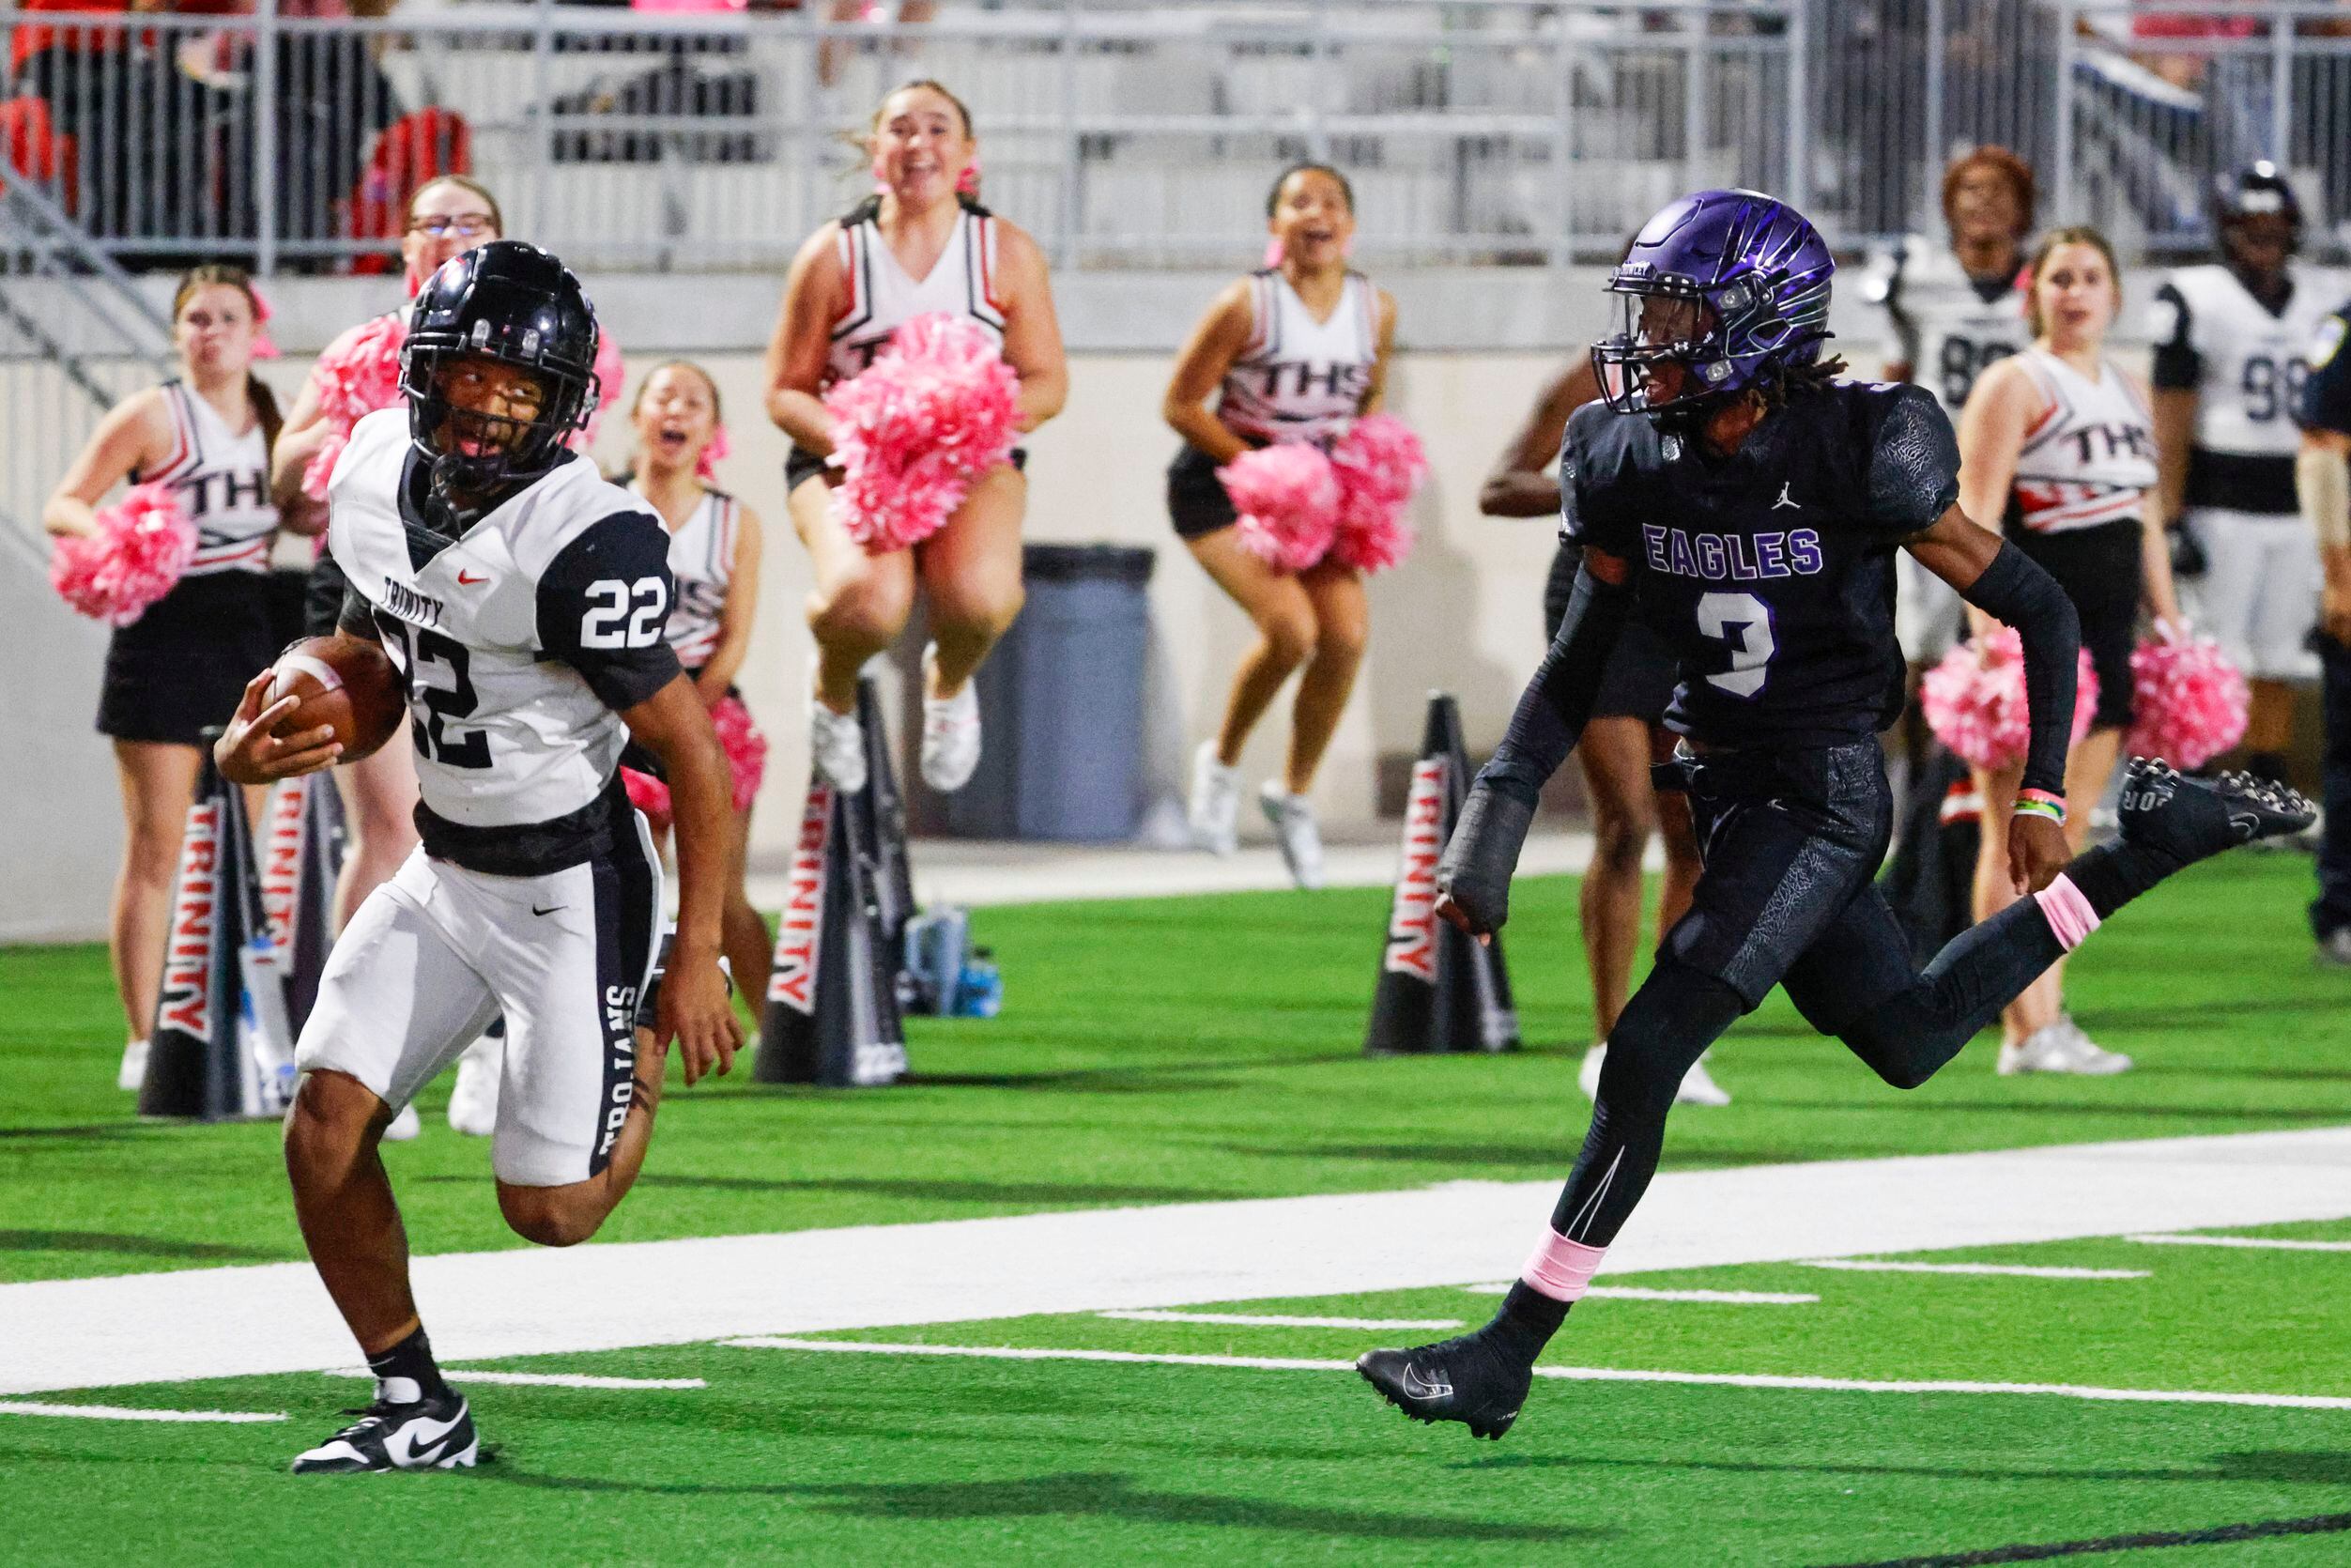 See photos of Euless Trinity's dominant win over Crowley